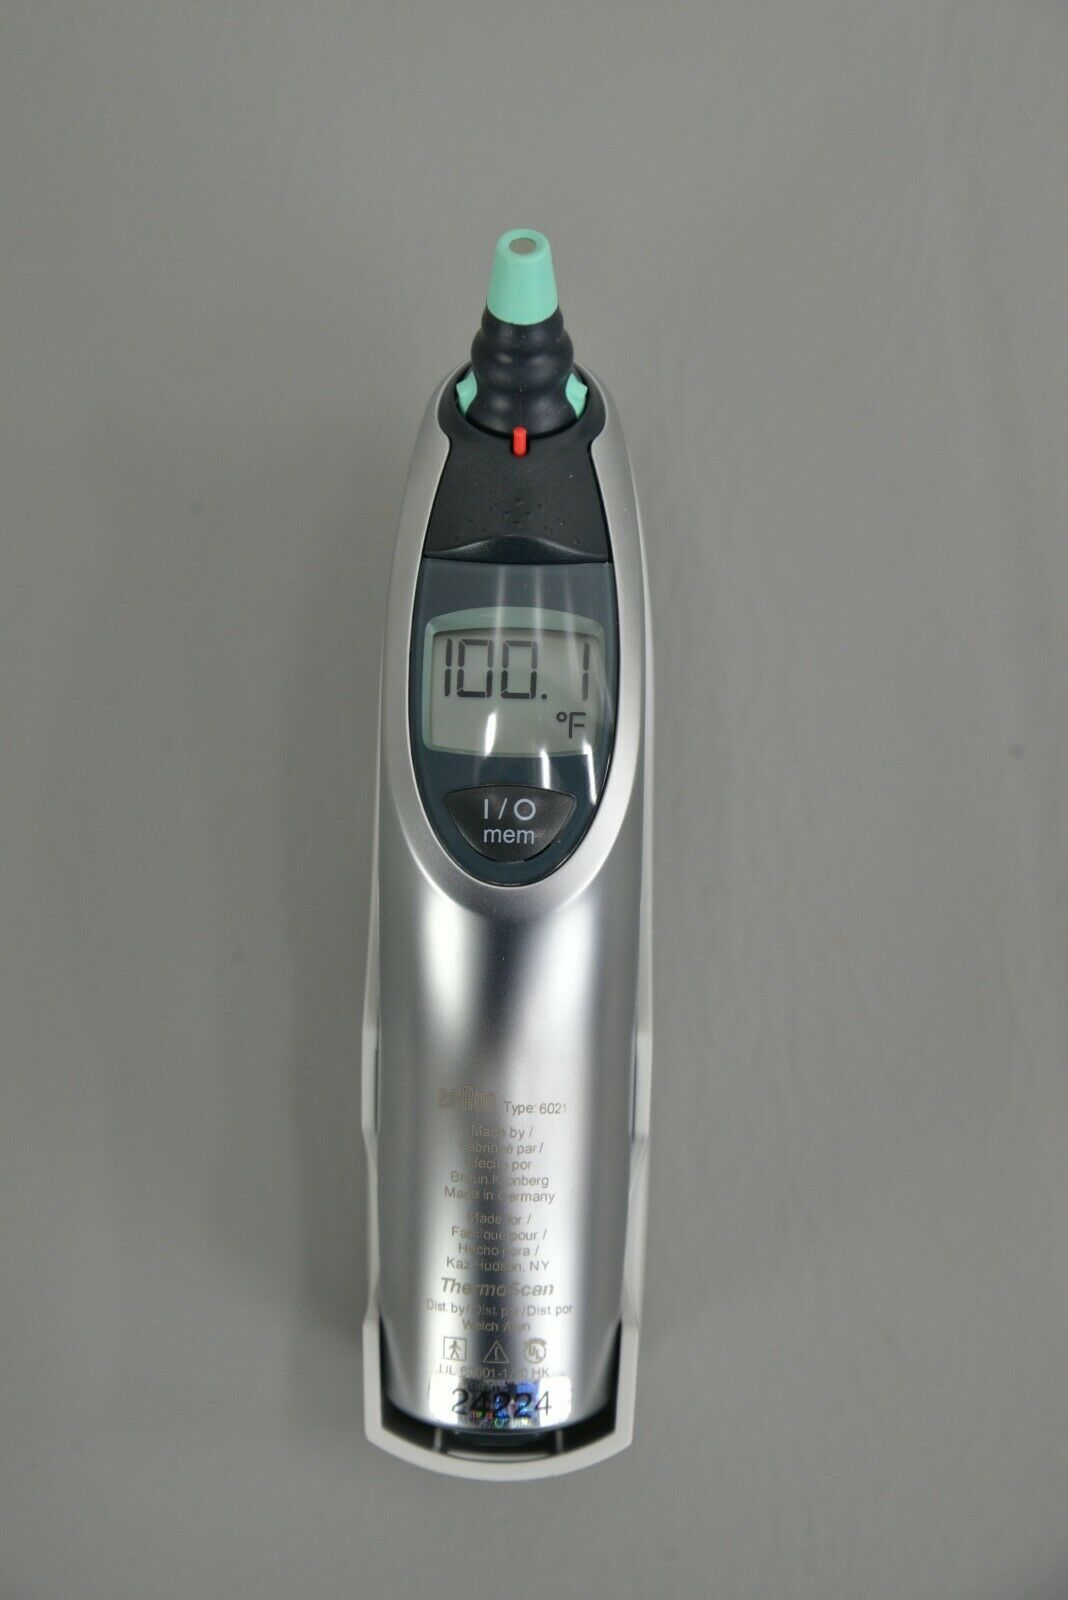 Uitgaven tolerantie reactie New Welch Allyn Braun ThermoScan Pro4000 Type 6021 Ear Probe Thermometer  (24224) – Rhino Trade LLC